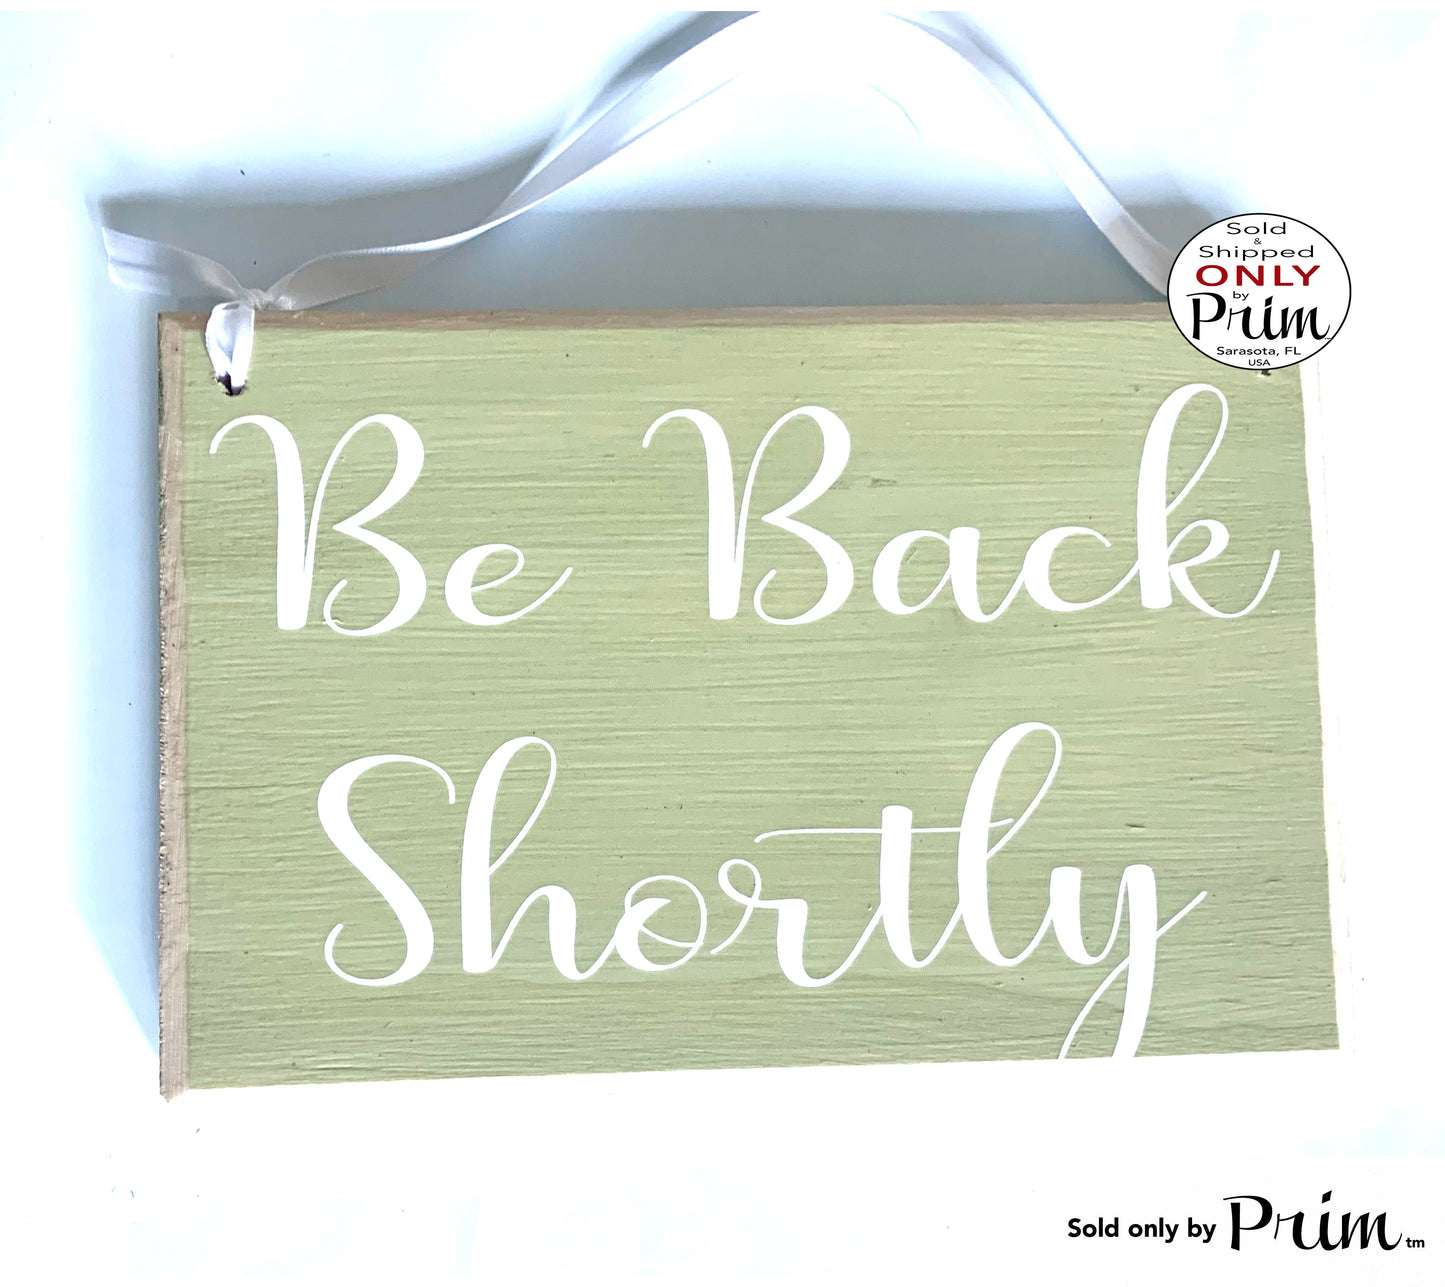 Designs by Prim 8x6 Be Back Shortly Custo Wood Sign I'll We'll Be Right Back Closed Come Soon Please Wait Unavailable Office Business Door Hanger Plaque